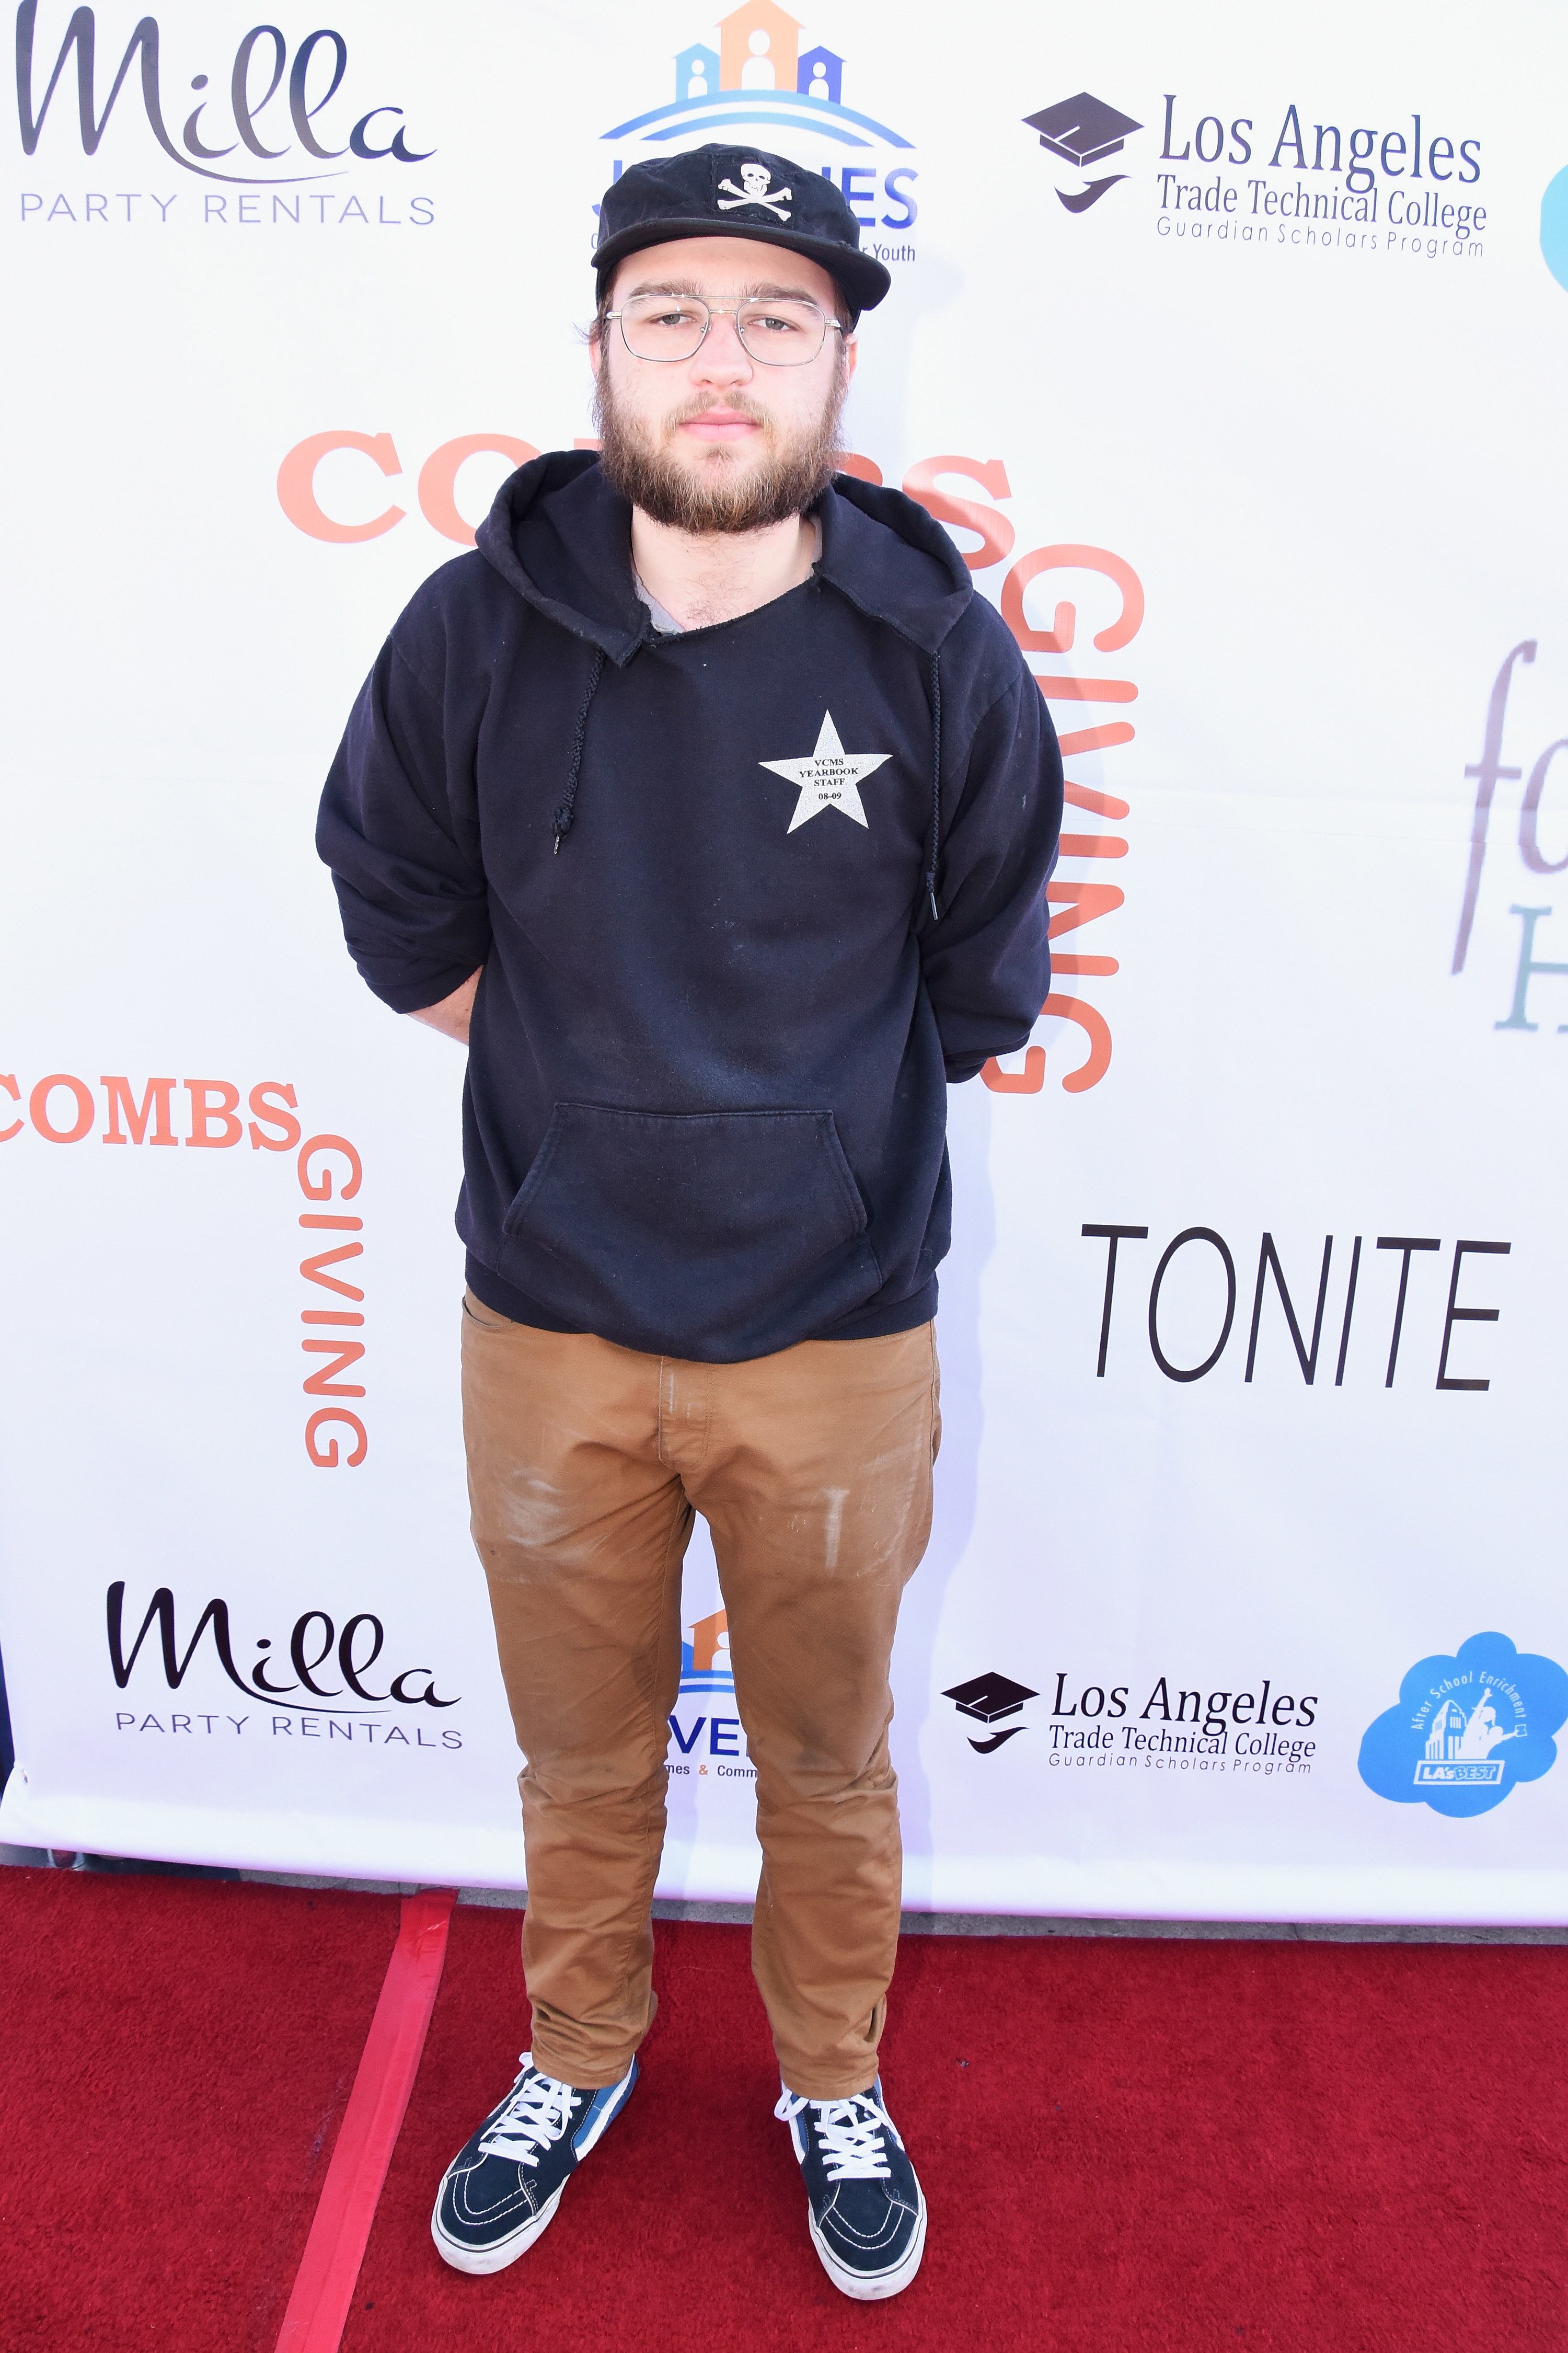 Angus dressed casually in a hoodie, baseball cap, and sneakers on the red carpet